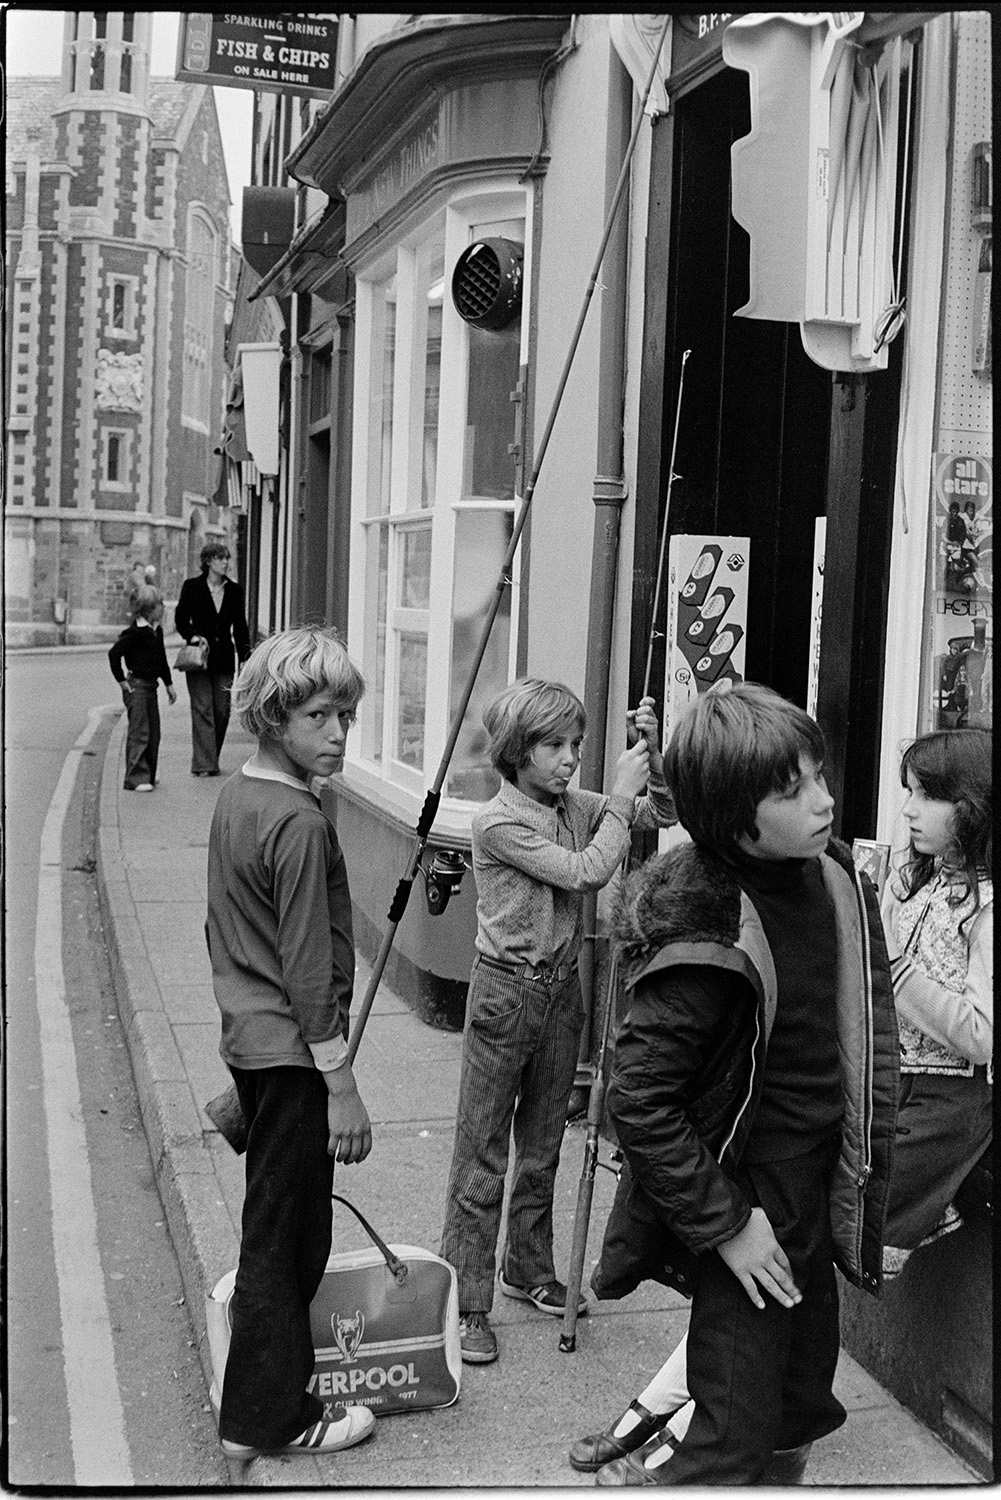 Shops and stalls at Pannier Market, WI Stall. 
[Children outside a shop front on a street in Bideford. Two of the children are holding fishing rods. A fish and chip shop sign can be seen in the background.]